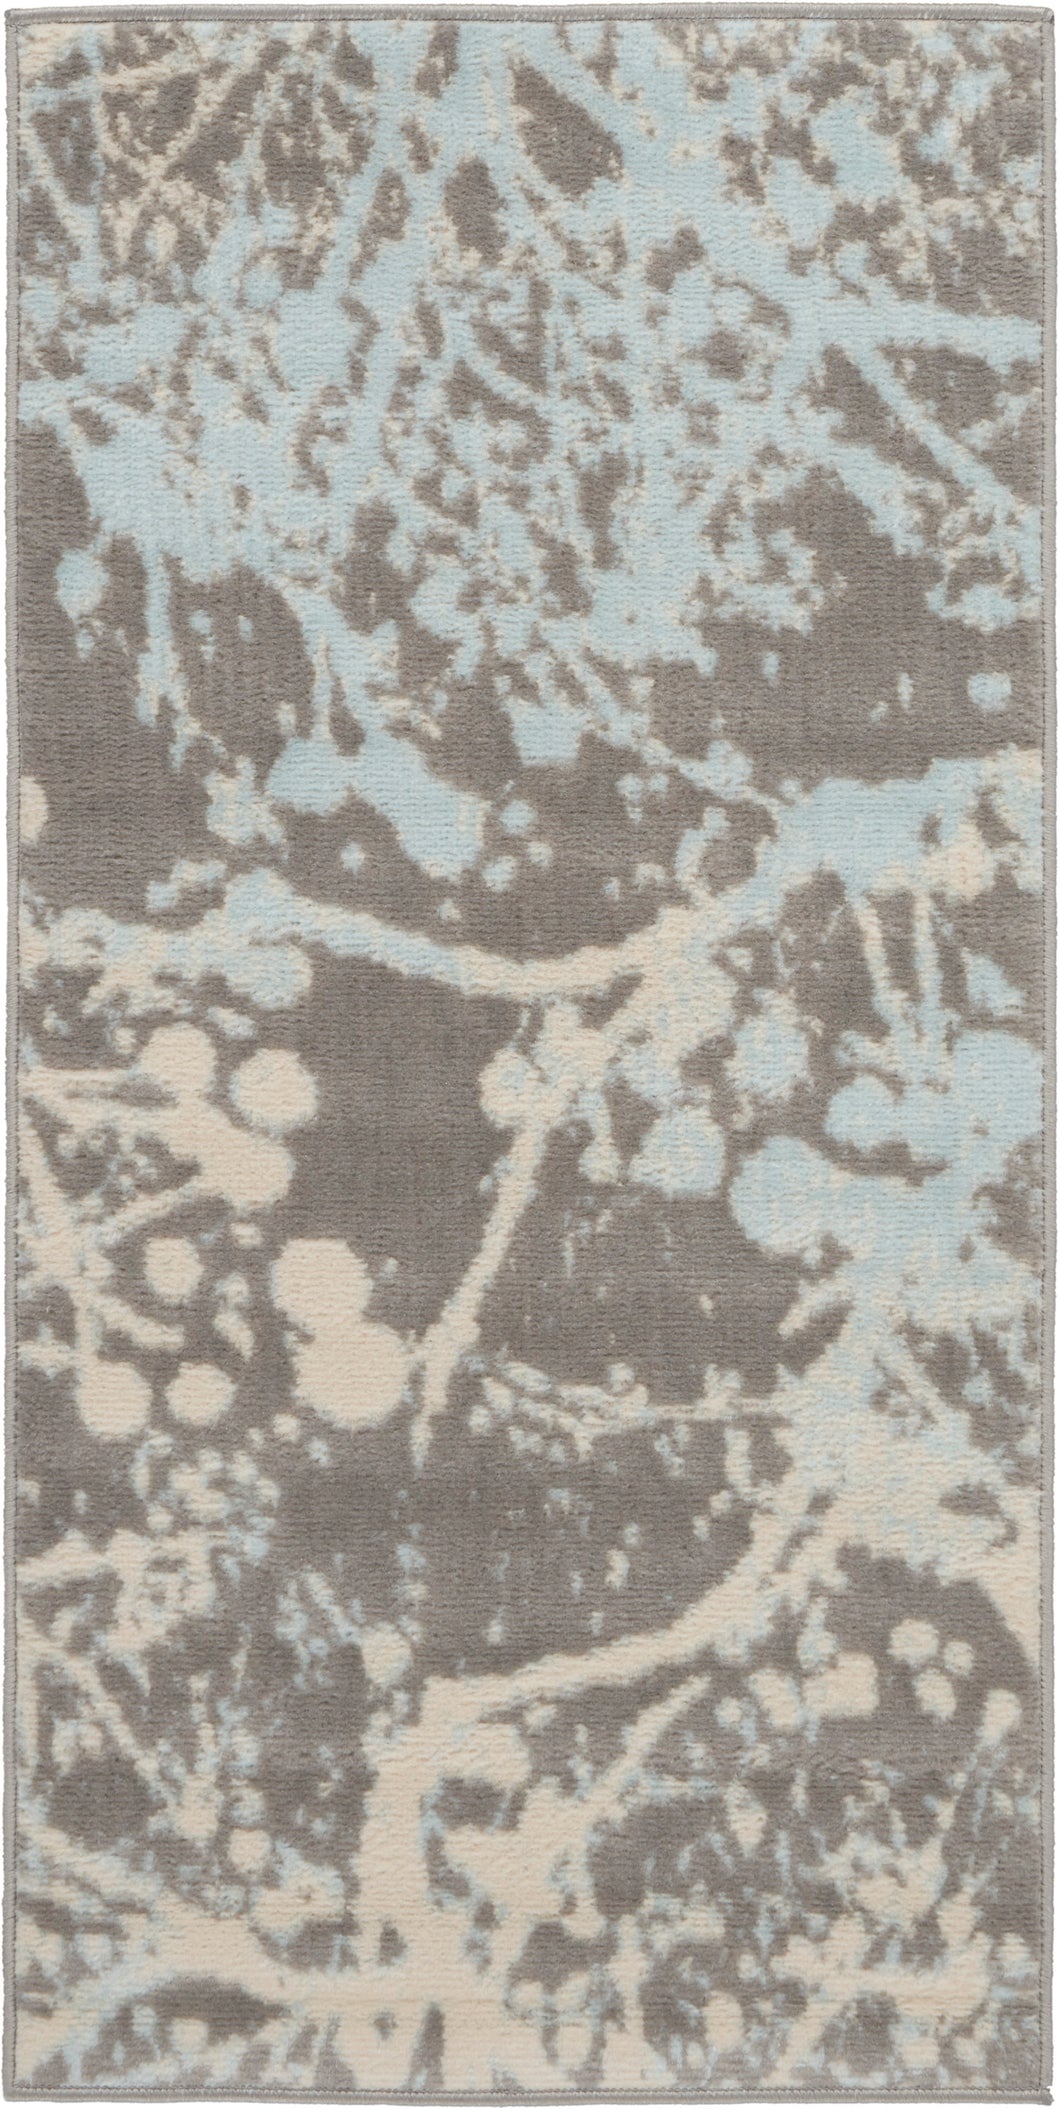 Nourison Jubilant 2' x 4' Small Grey and Blue Nature-inspired Area Rug JUB12 Grey